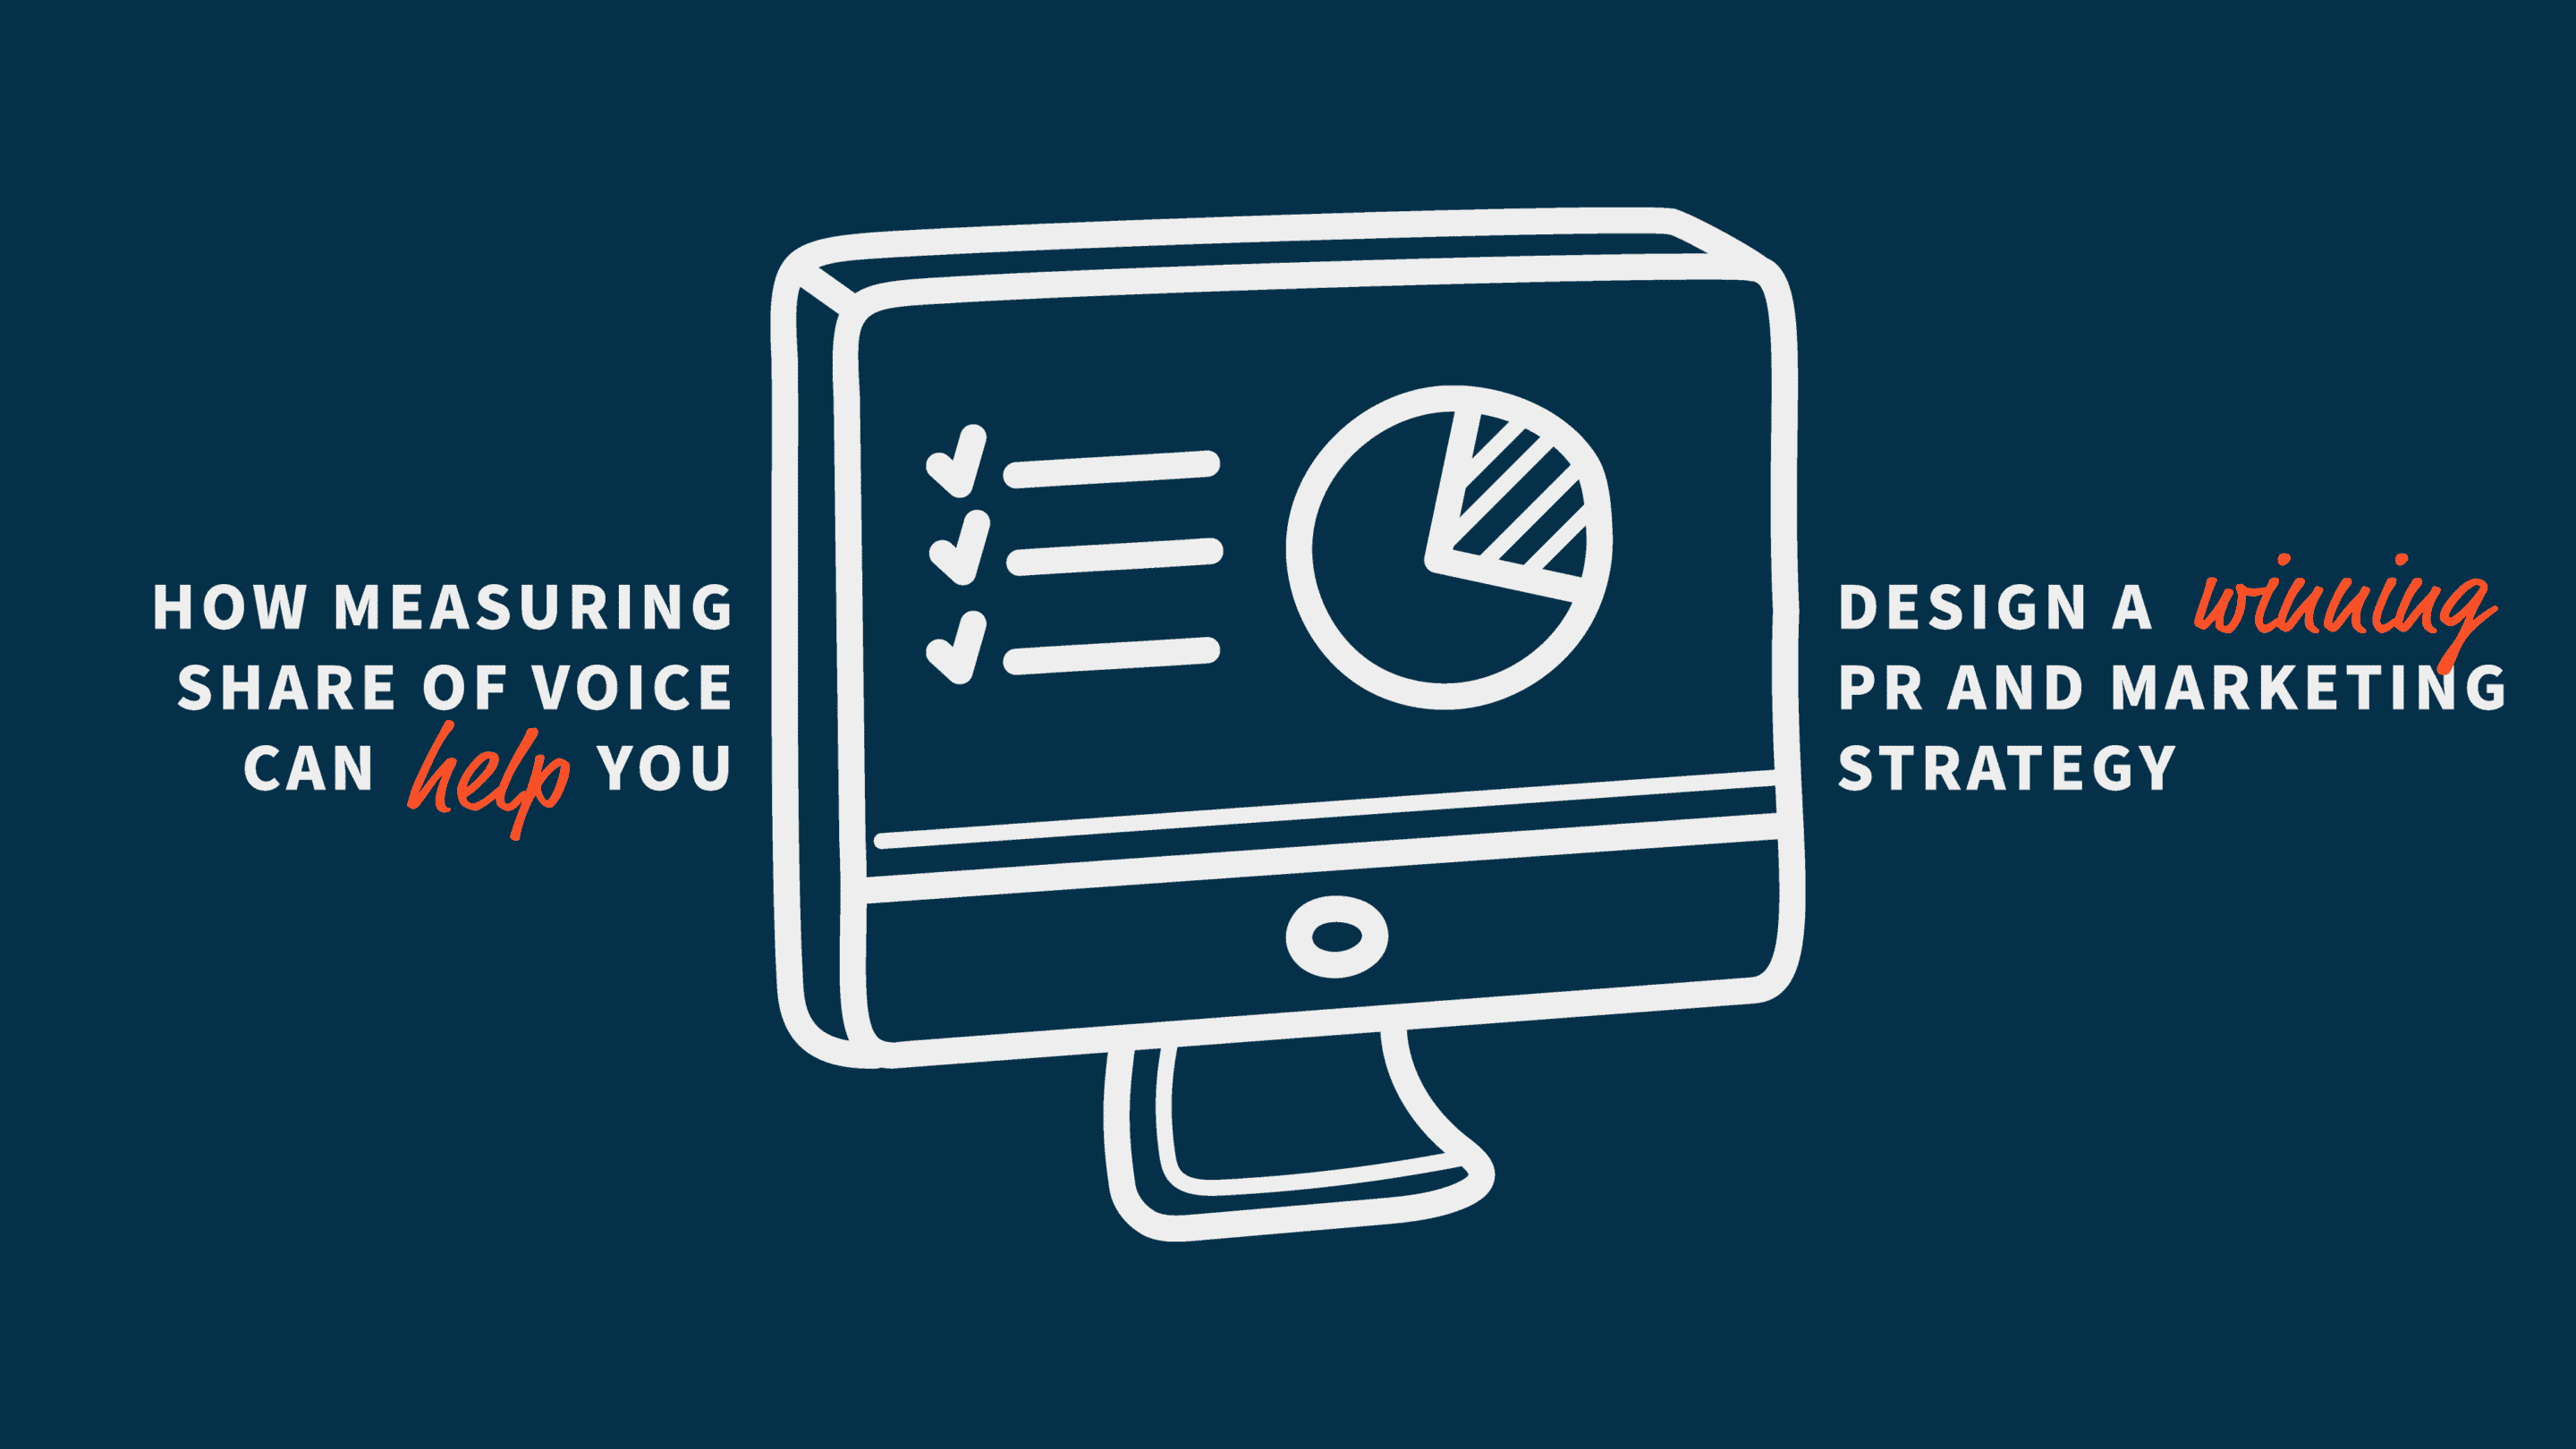 How measuring share of voice can help you design a winning PR and marketing strategy